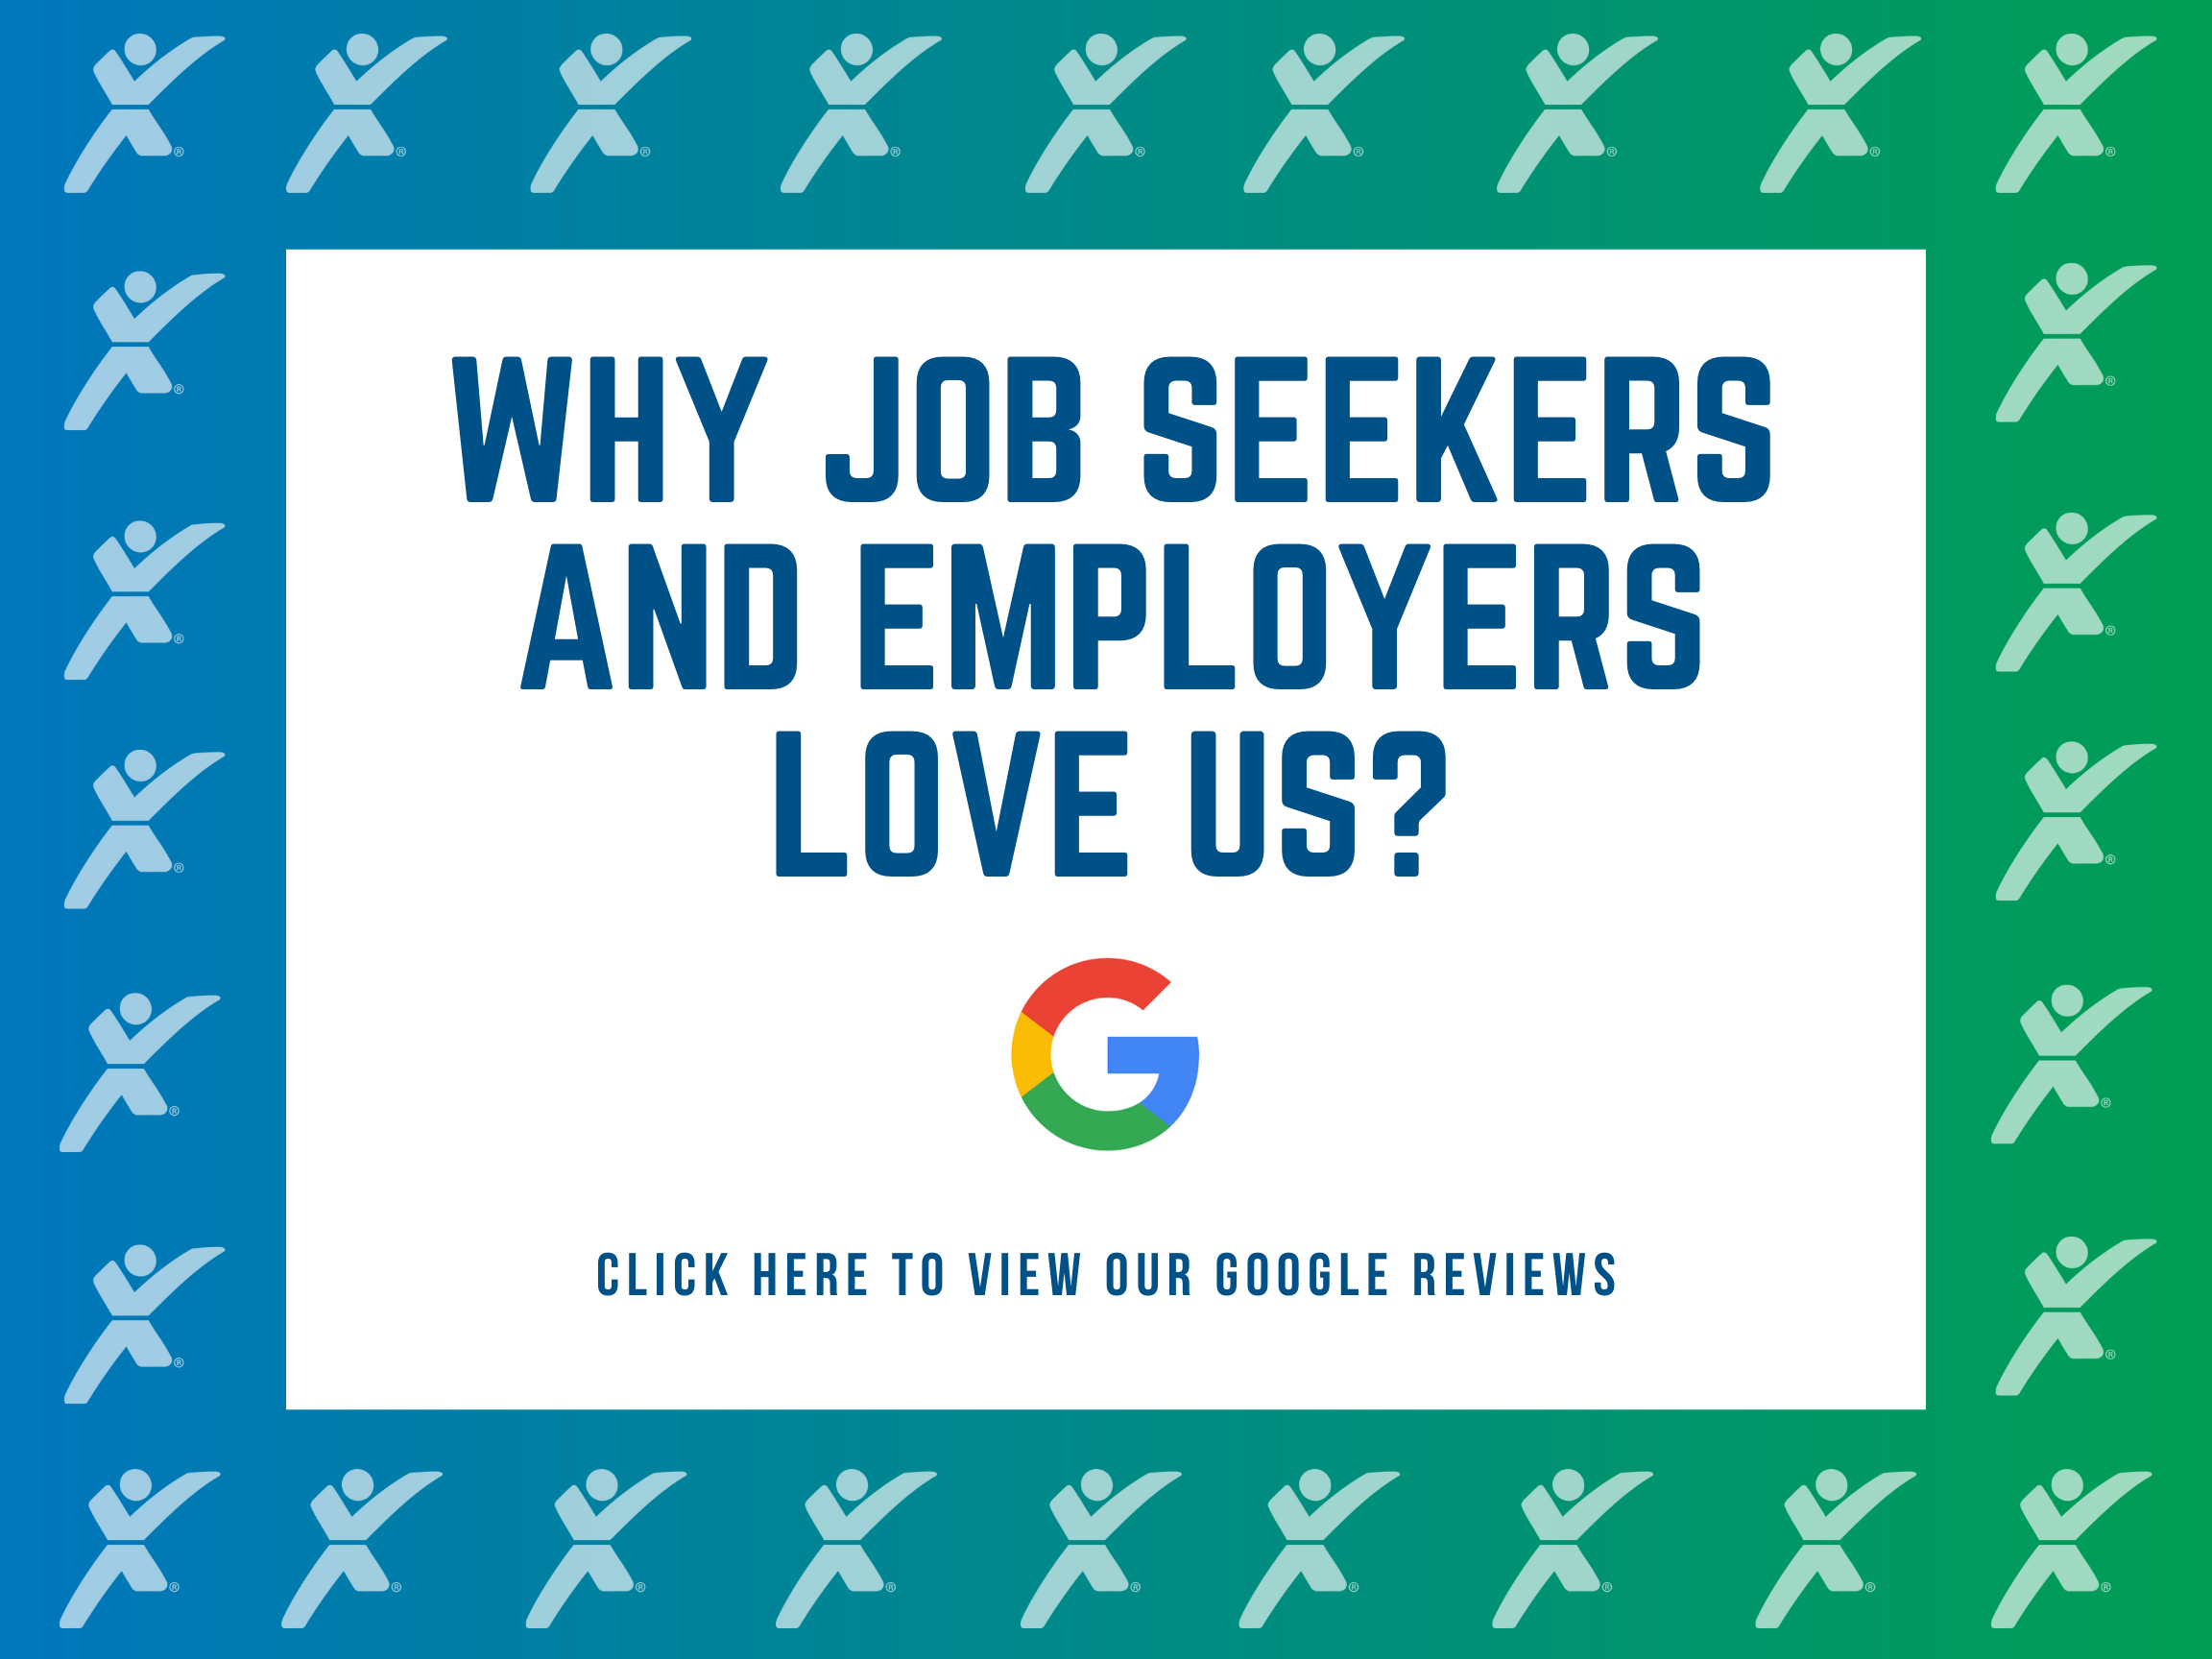 Why job seekers and employers love us